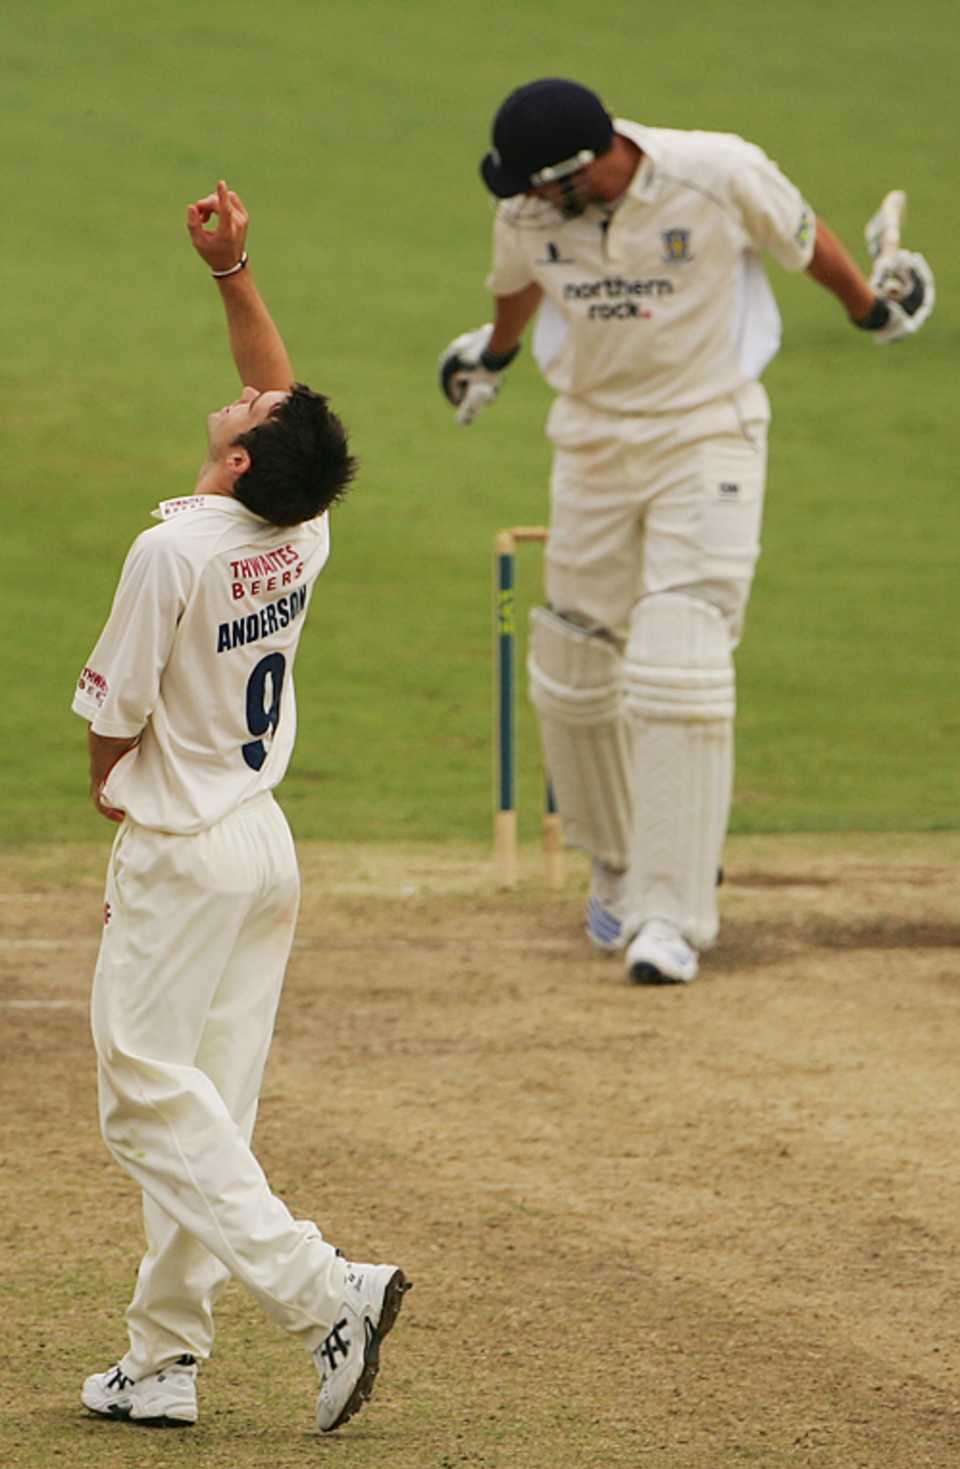 James Anderson celebrates removing Steve Harmison to win the match for Lancashire, Lancashire v Durham, County Championship, Old Trafford, May 9, 2008